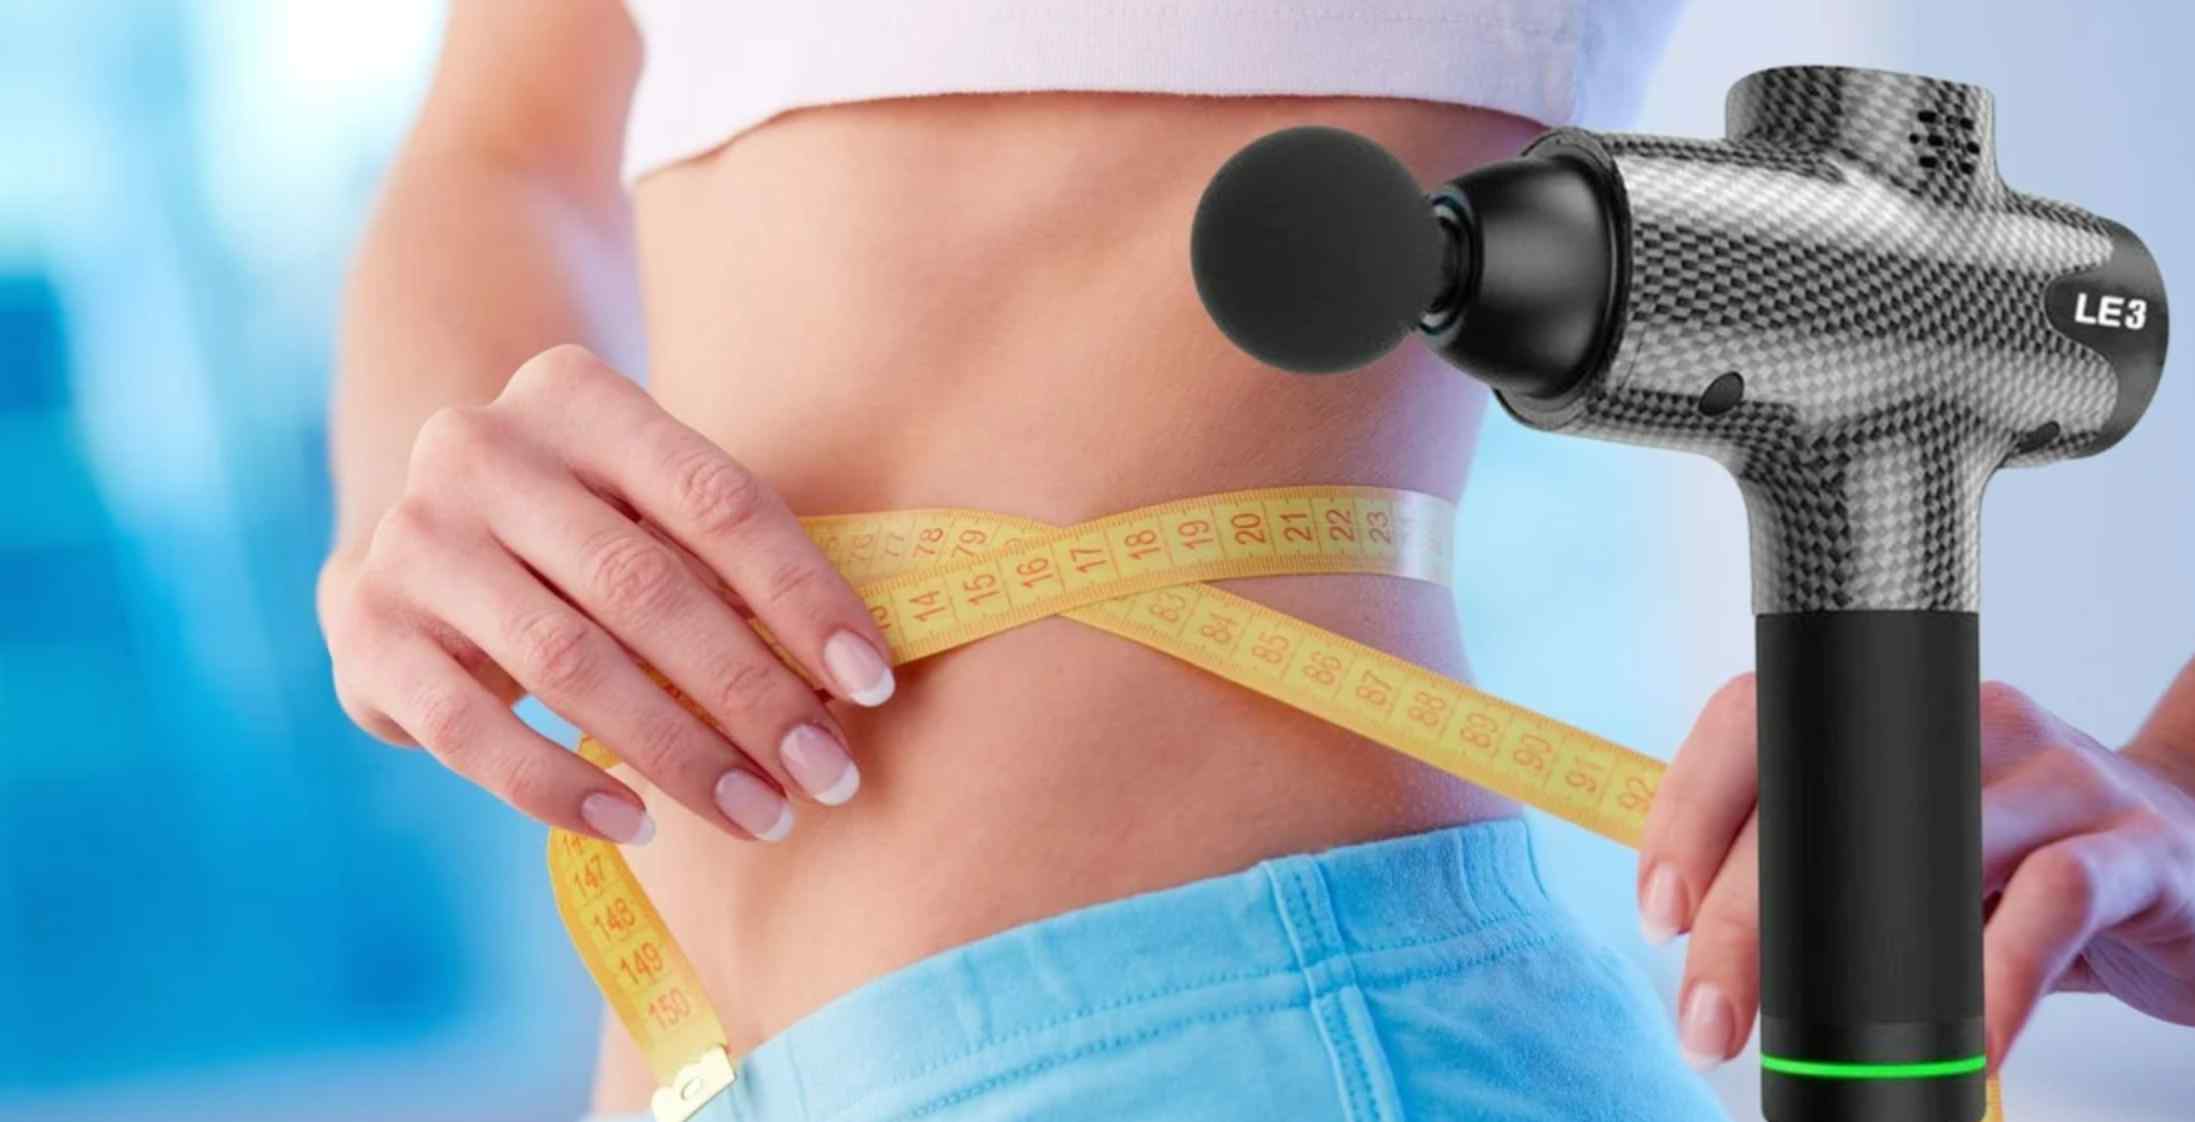 The oil is like a secret weapon against belly fat.